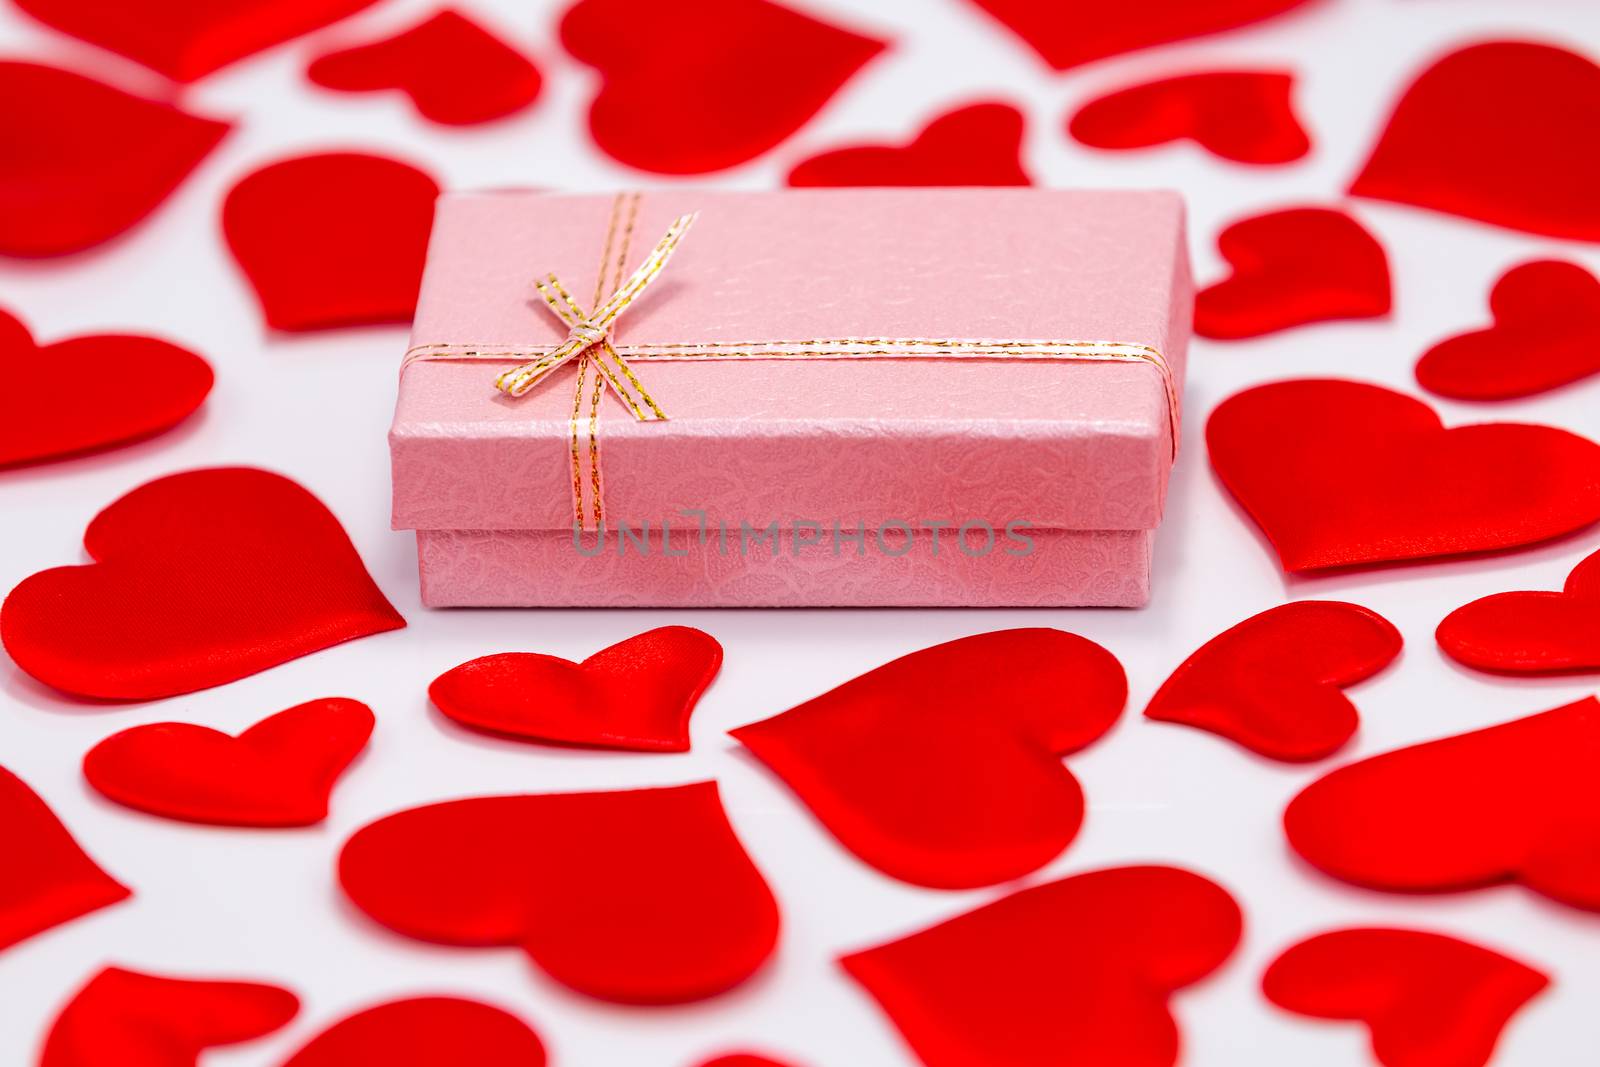 Pink Gift Box Surrounded by Scattered Hearts by DamantisZ